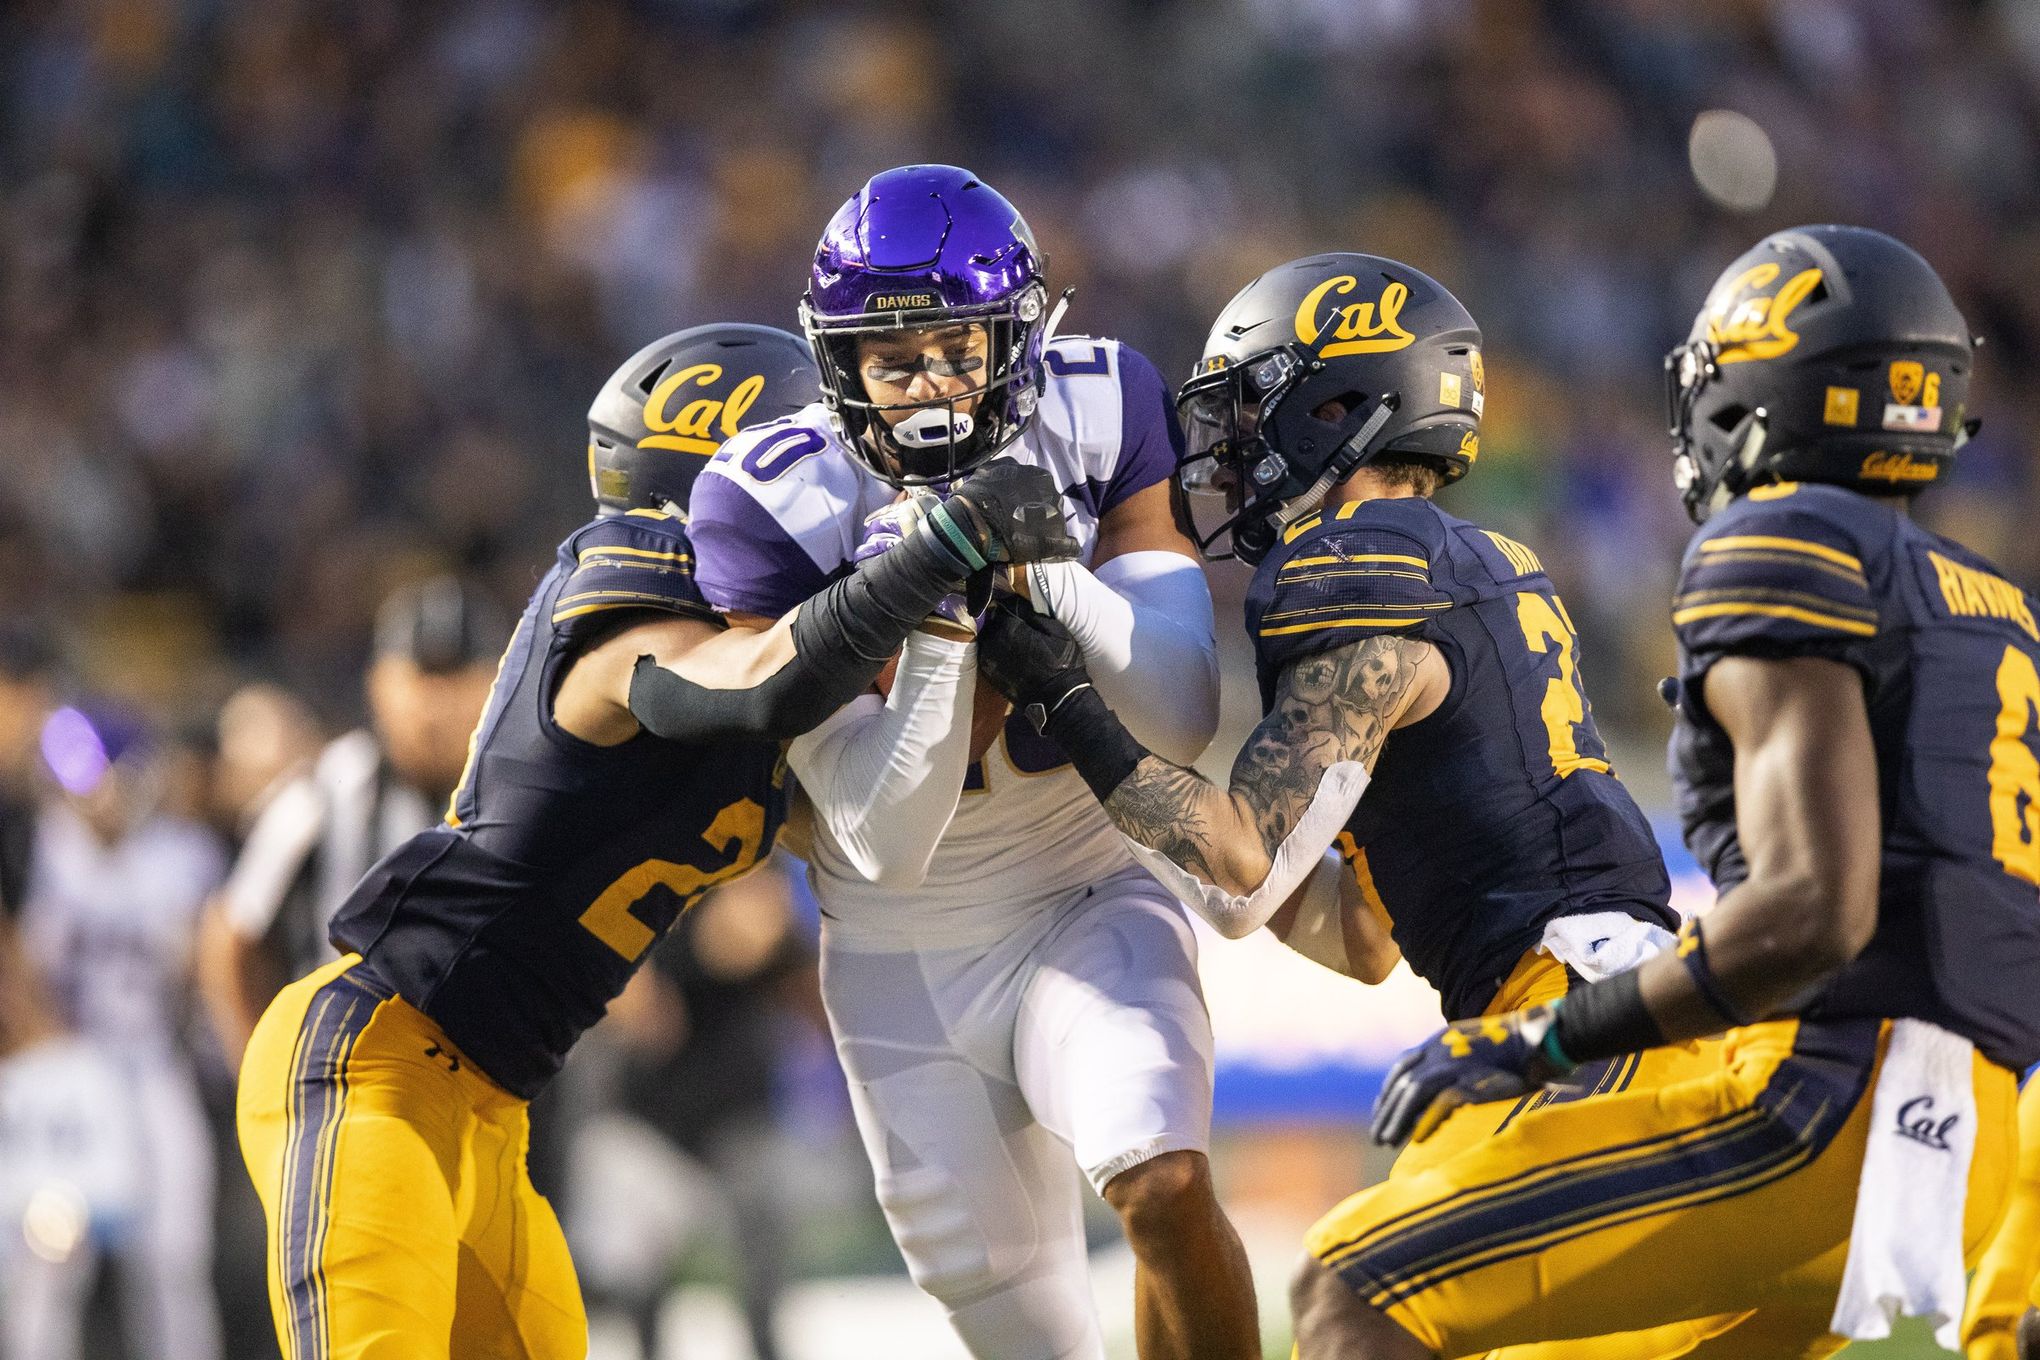 Washington vs. Cal: Live Stream, TV Channel and Start Time